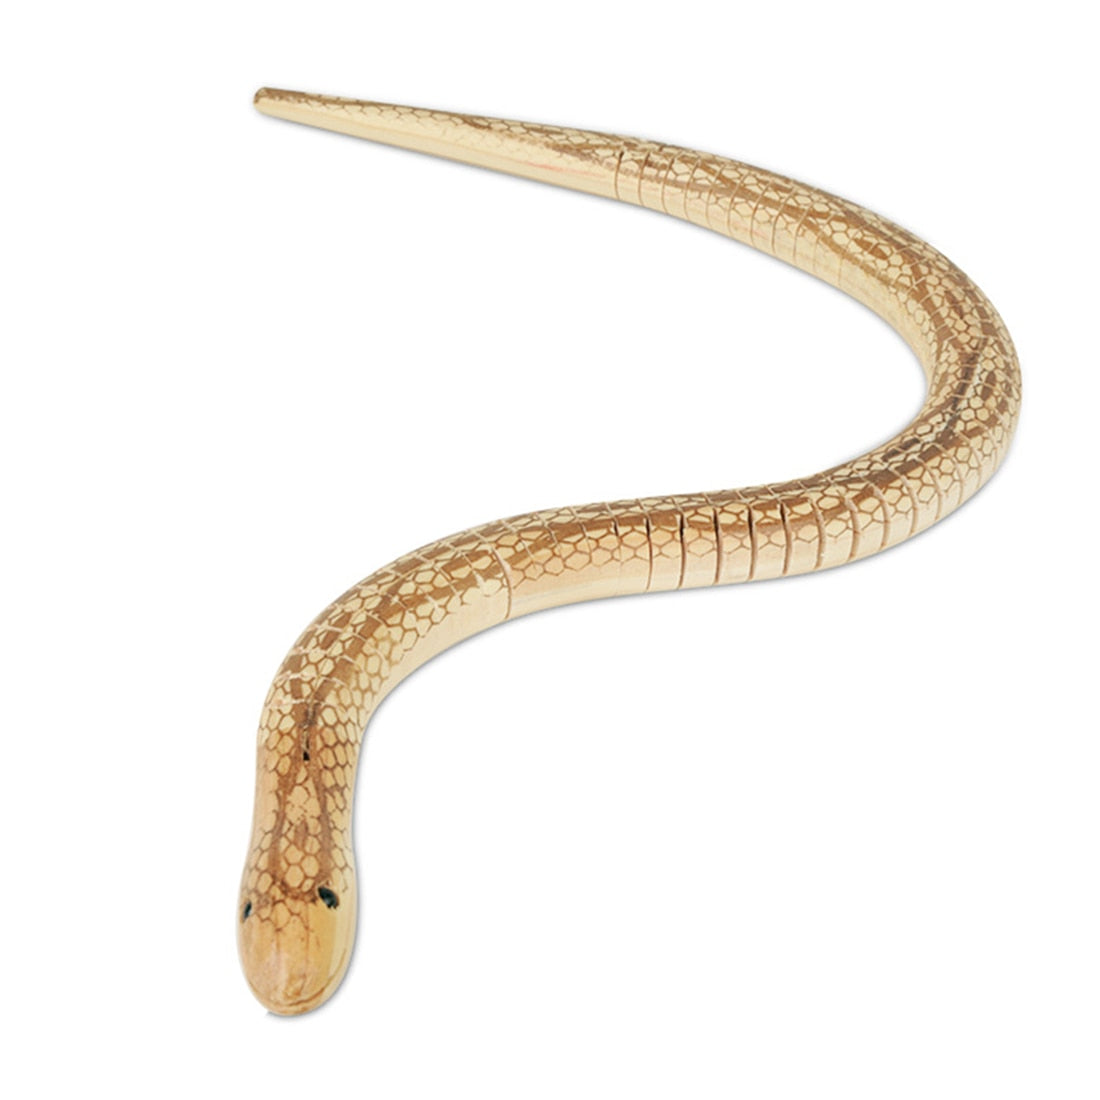 Wooden Snake Toy | Snakes Jewelry & Fashion